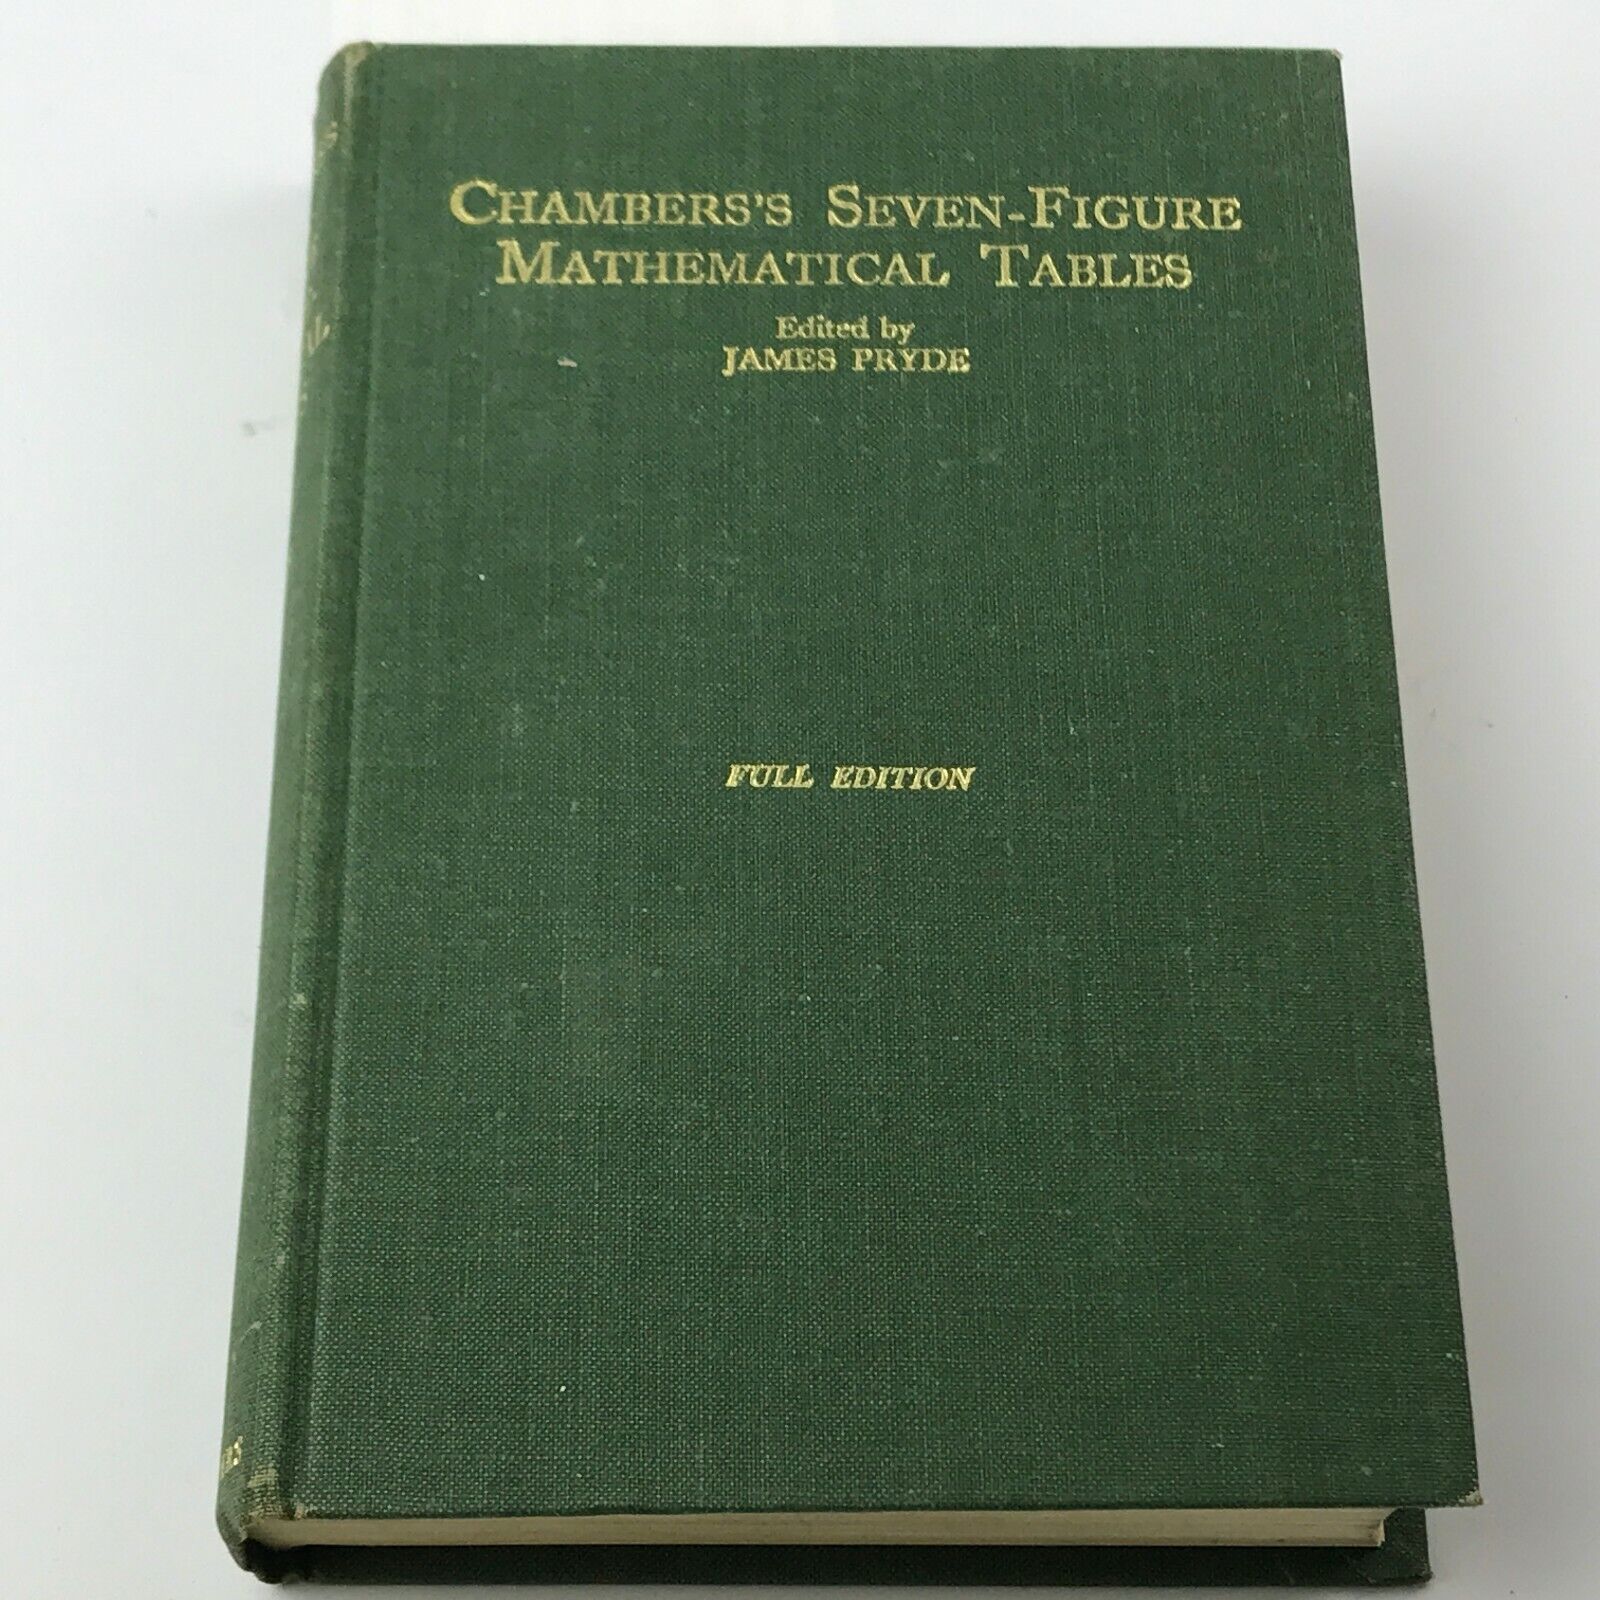 VINTAGE CHAMBERS SEVEN FIGURE MATHEMATICAL TABLES PRYDE FULL EDITION 1961 BOOK